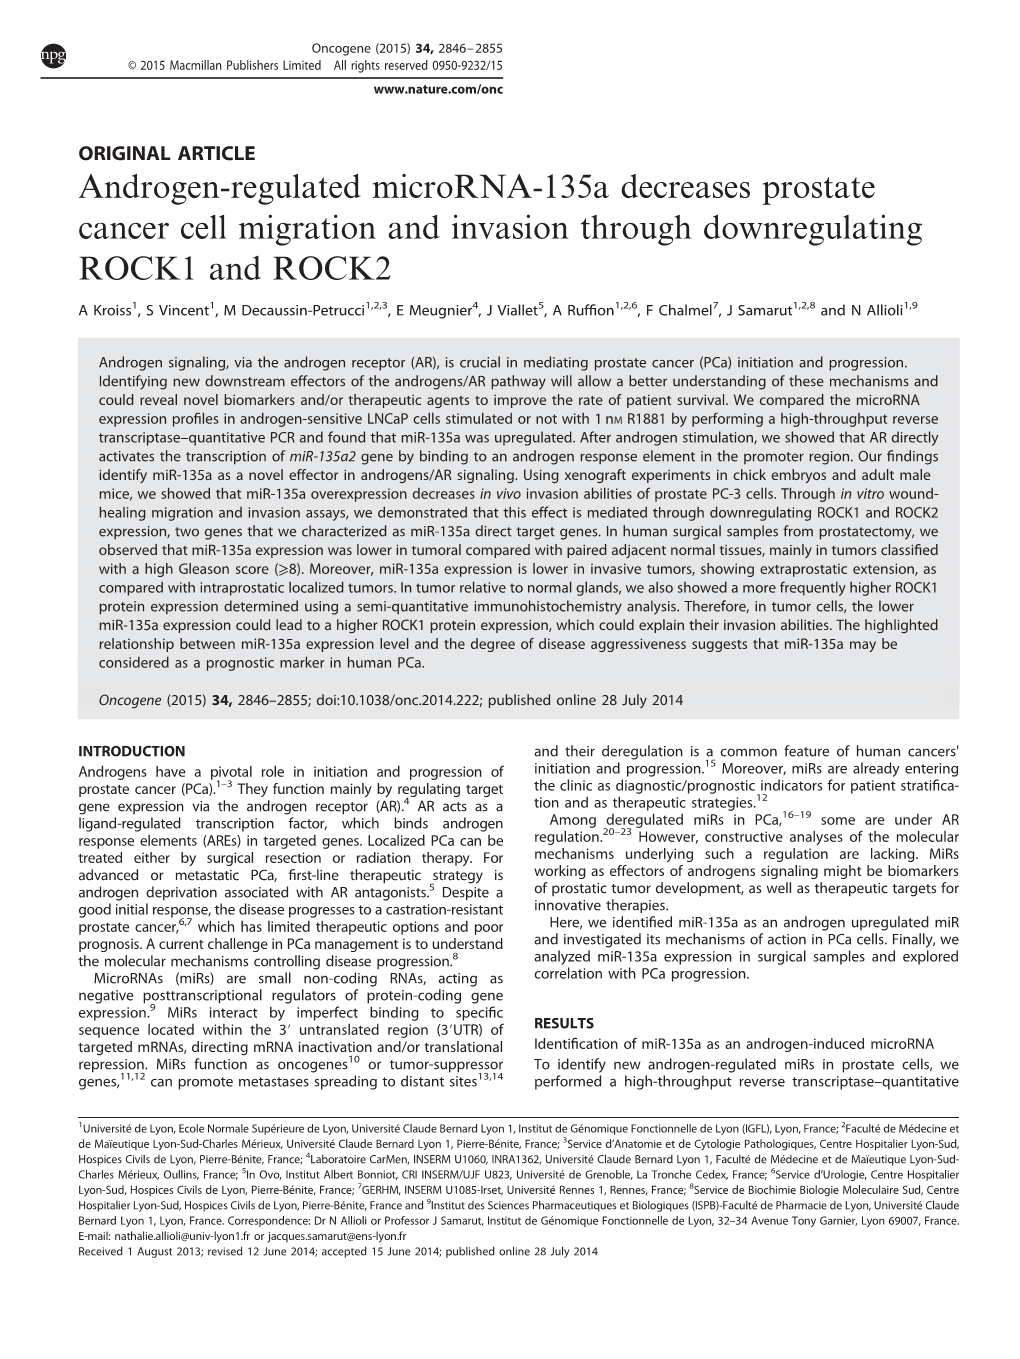 Androgen-Regulated Microrna-135A Decreases Prostate Cancer Cell Migration and Invasion Through Downregulating ROCK1 and ROCK2